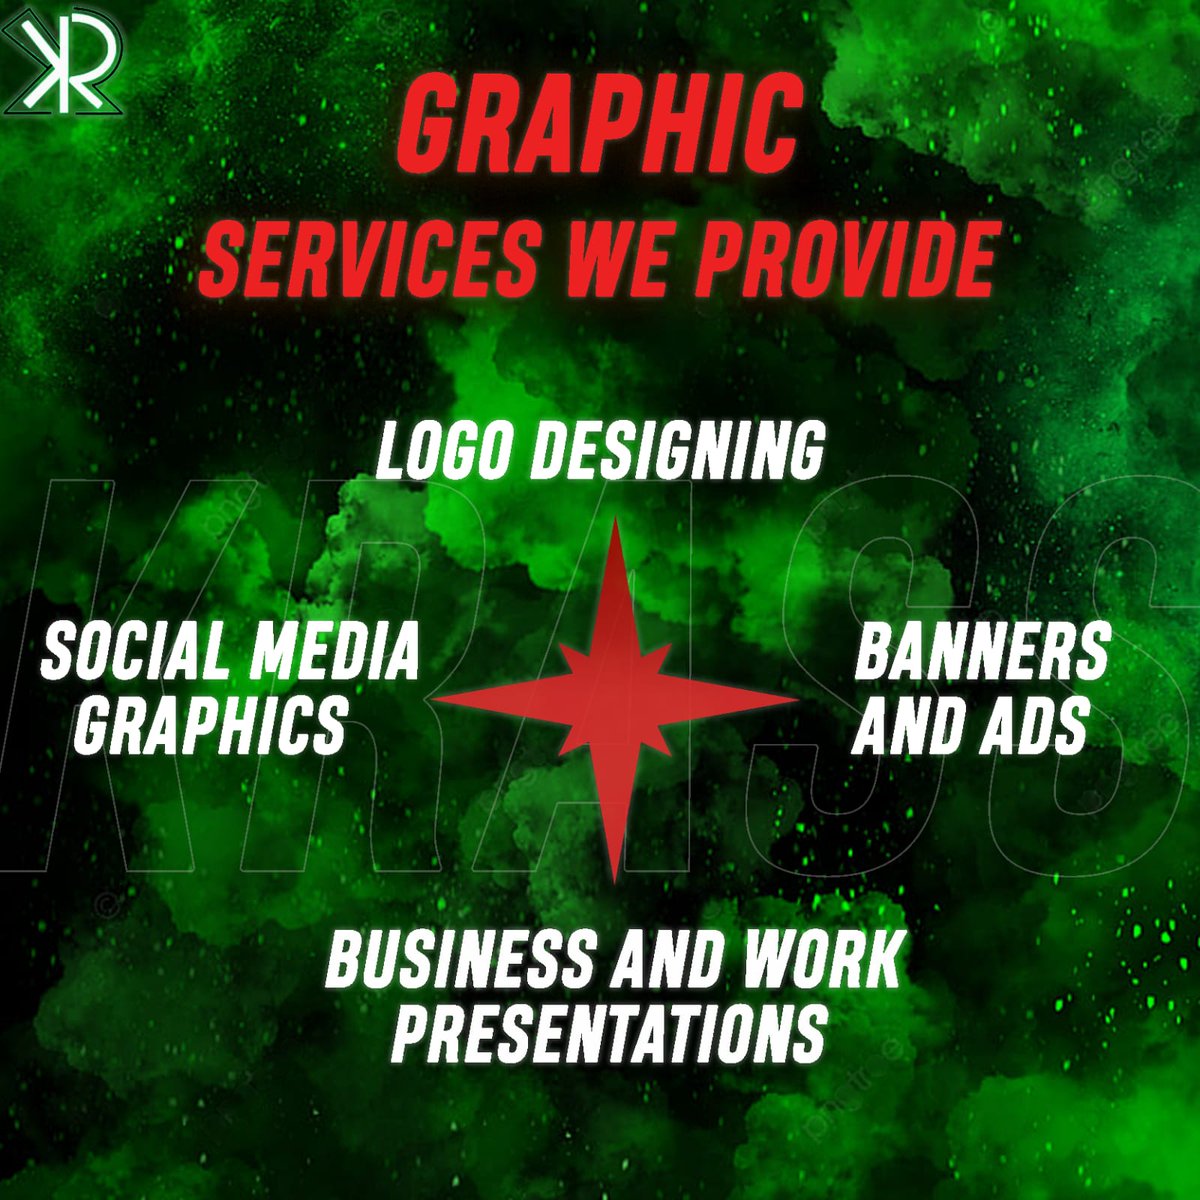 These are some of the graphic services we provide #logodesigning #bannerandads #businesspresentations #socialmedia